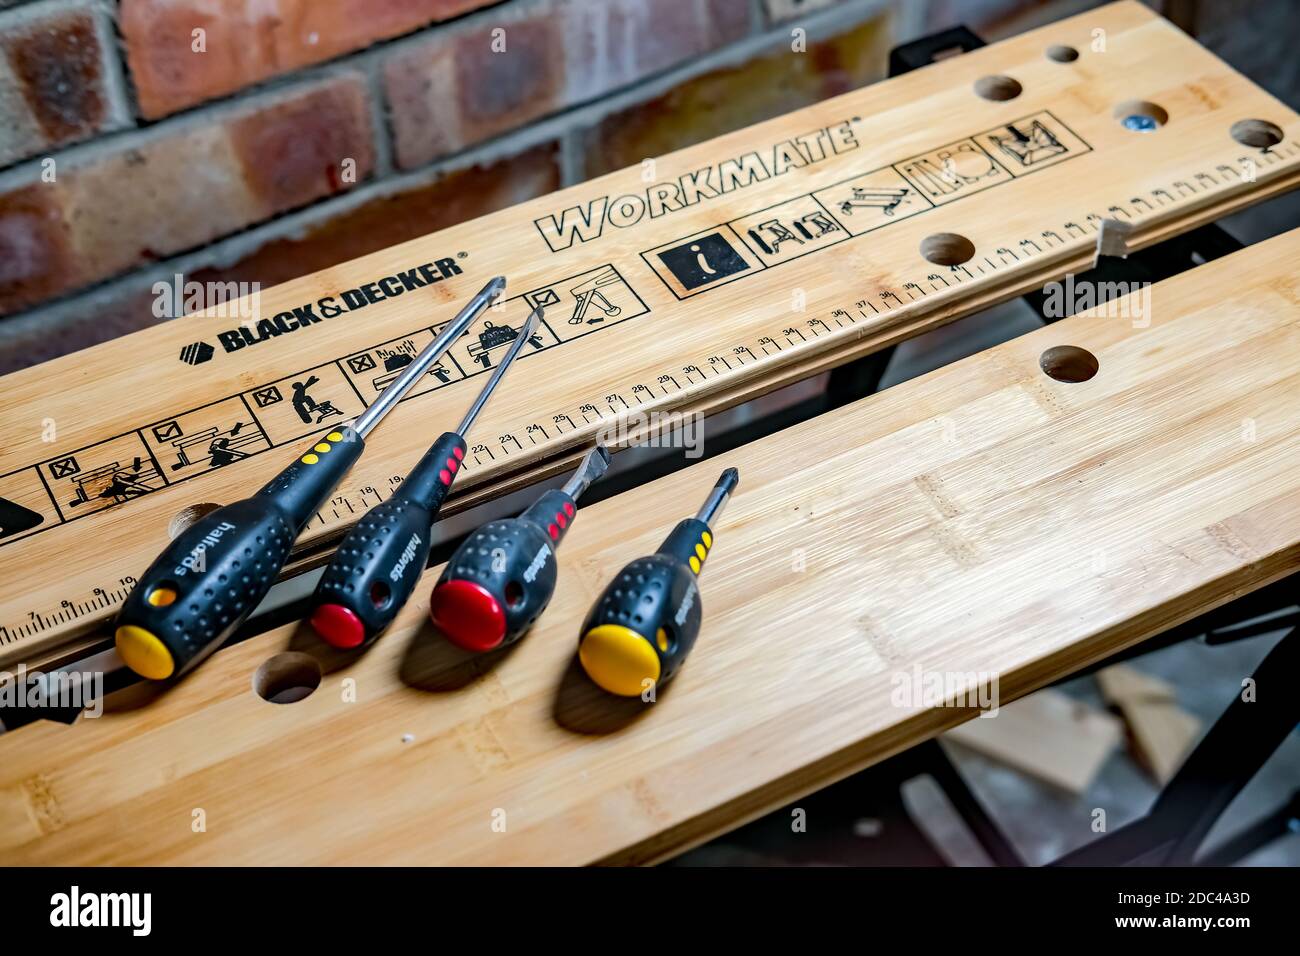 https://c8.alamy.com/comp/2DC4A3D/norwich-norfolk-uk-november-17-2020-an-illustrative-photo-of-a-black-and-decker-workmate-bench-with-a-selection-of-halfords-branded-screw-drivers-2DC4A3D.jpg